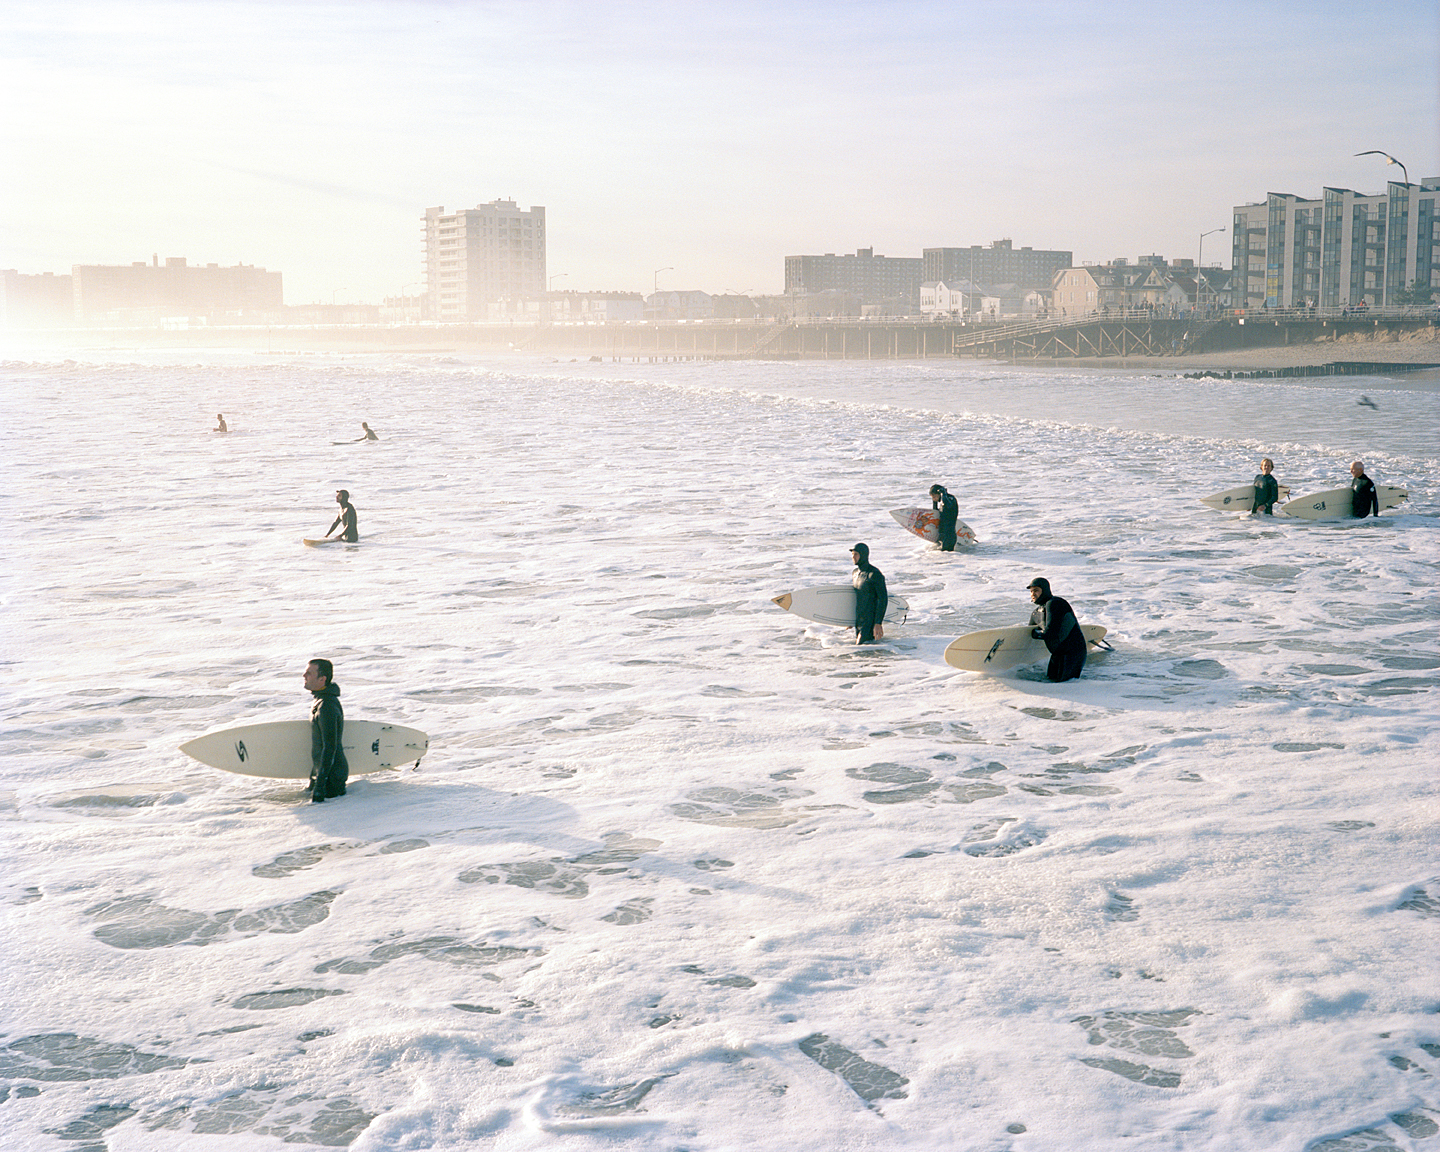  Surfers Wading Out, 2009          